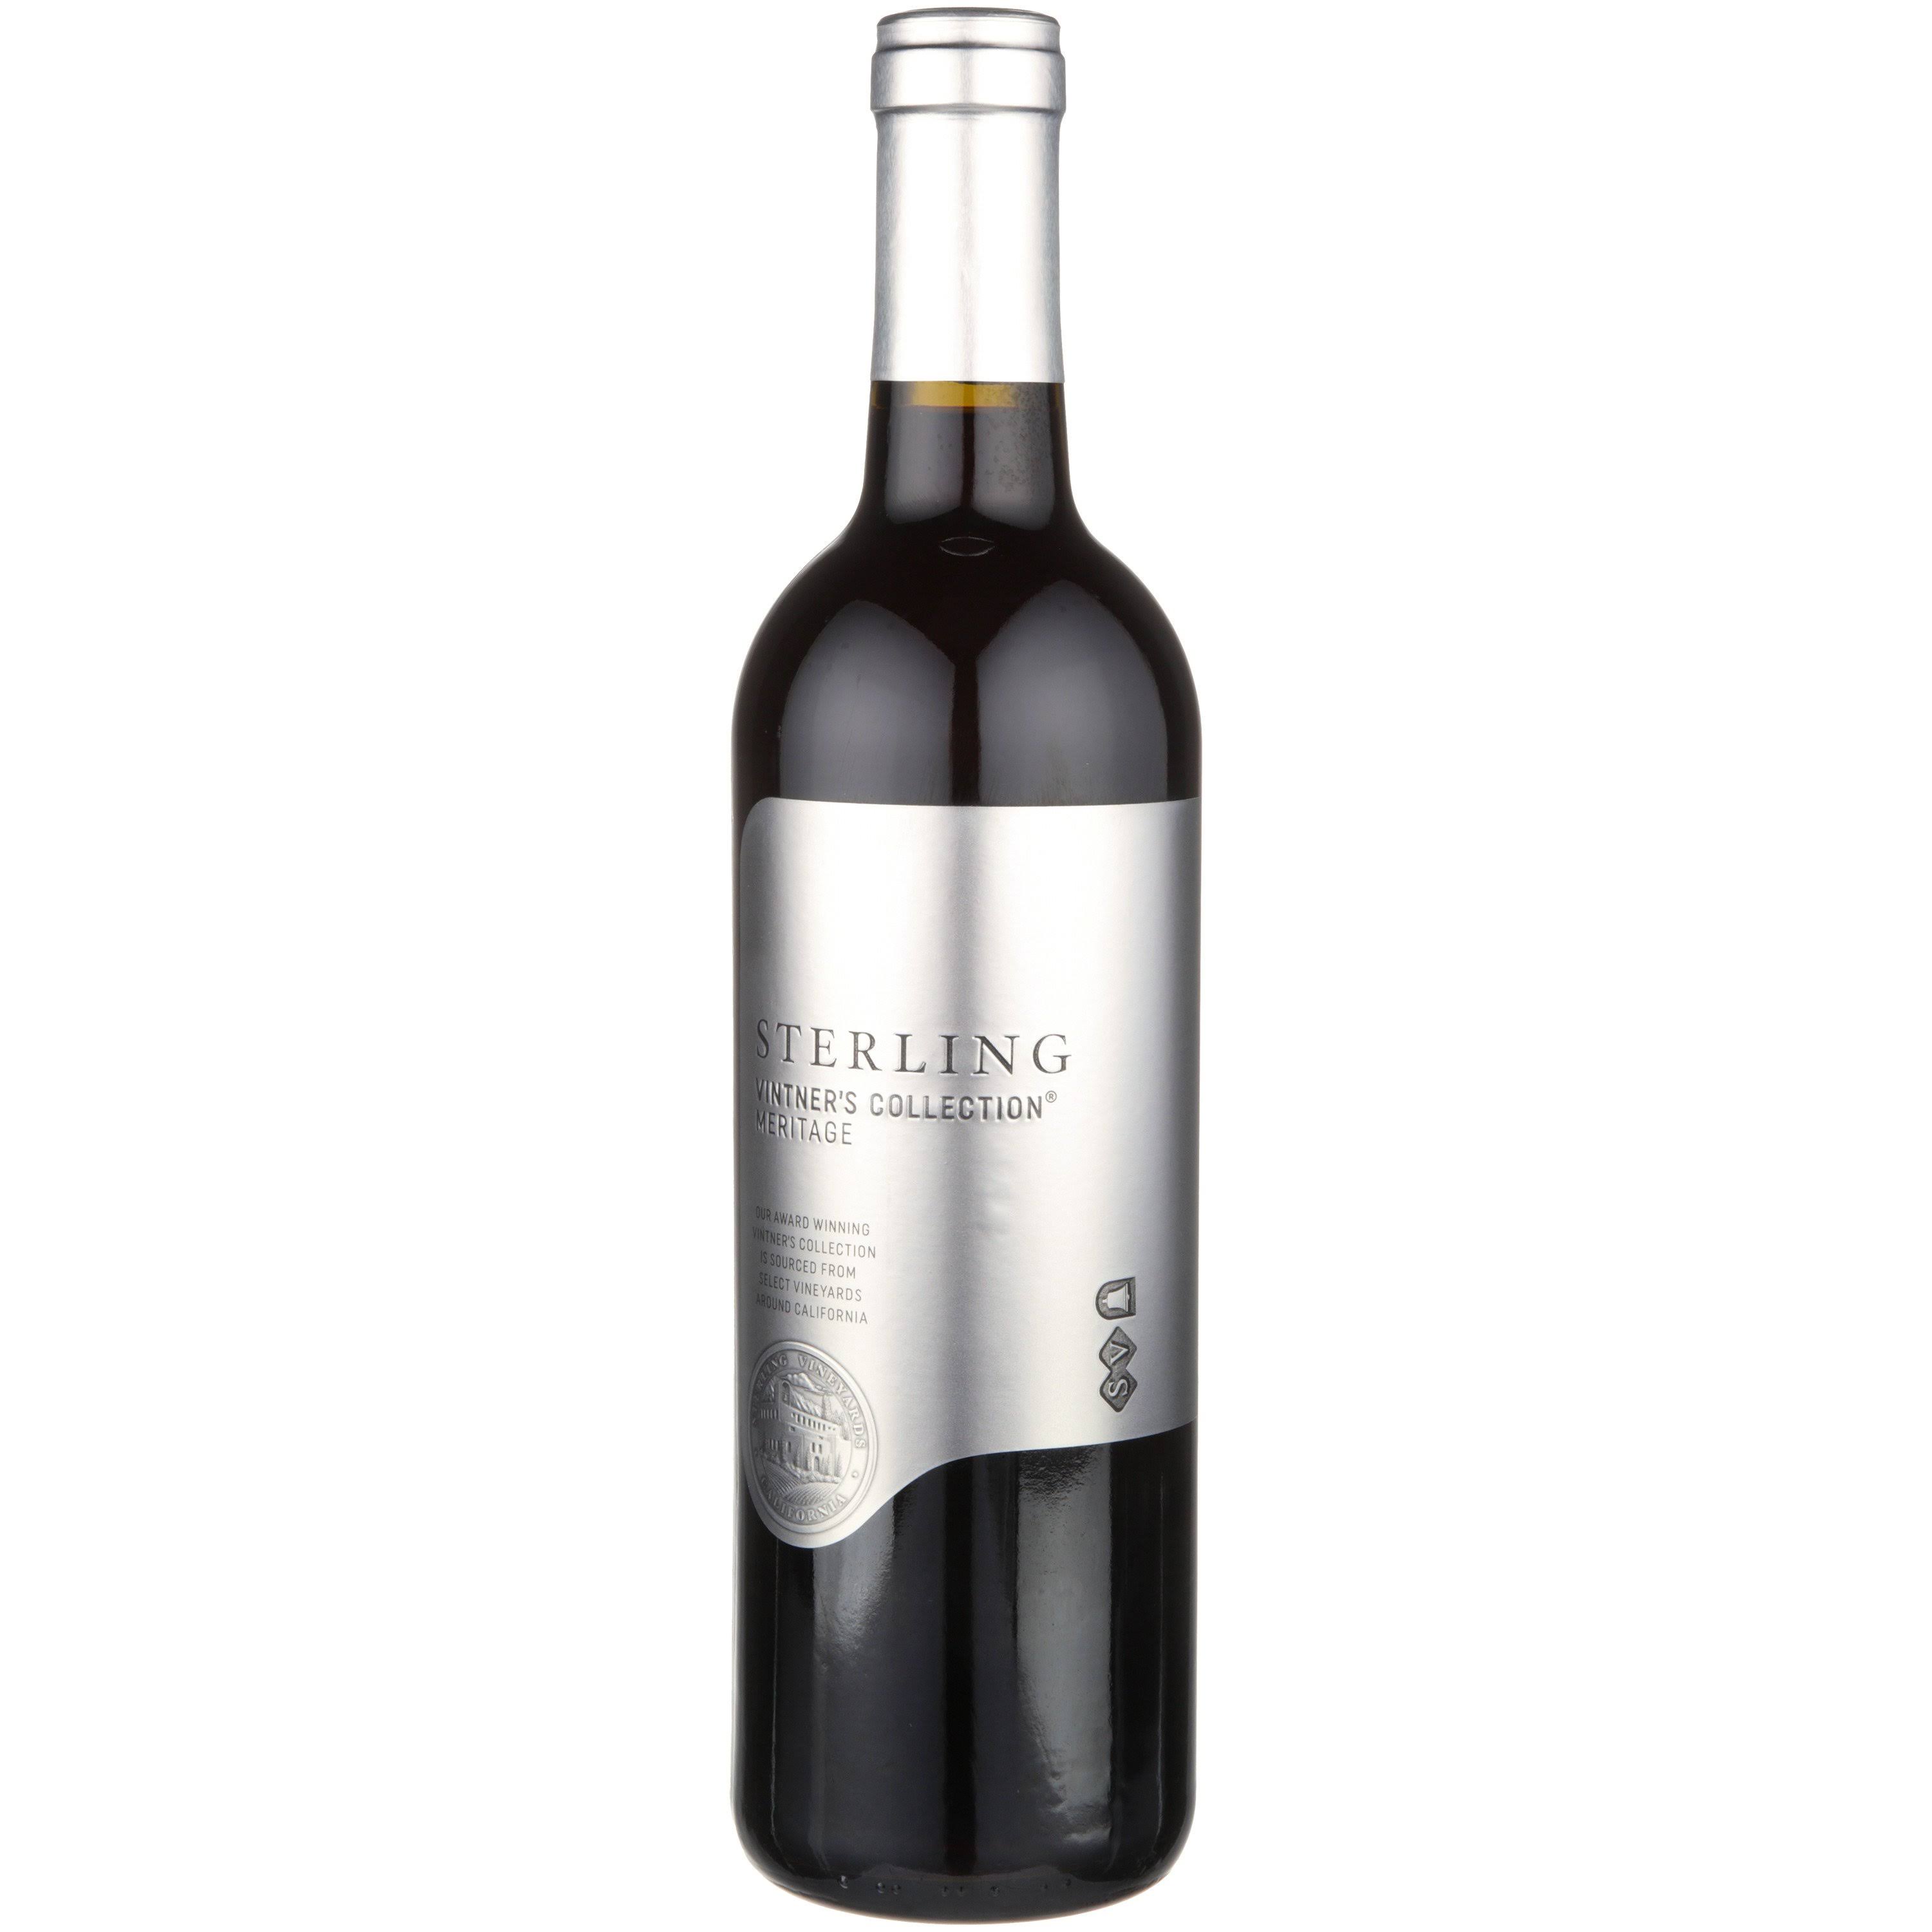 Sterling Vintner's Collection Meritage, California - 750 ml